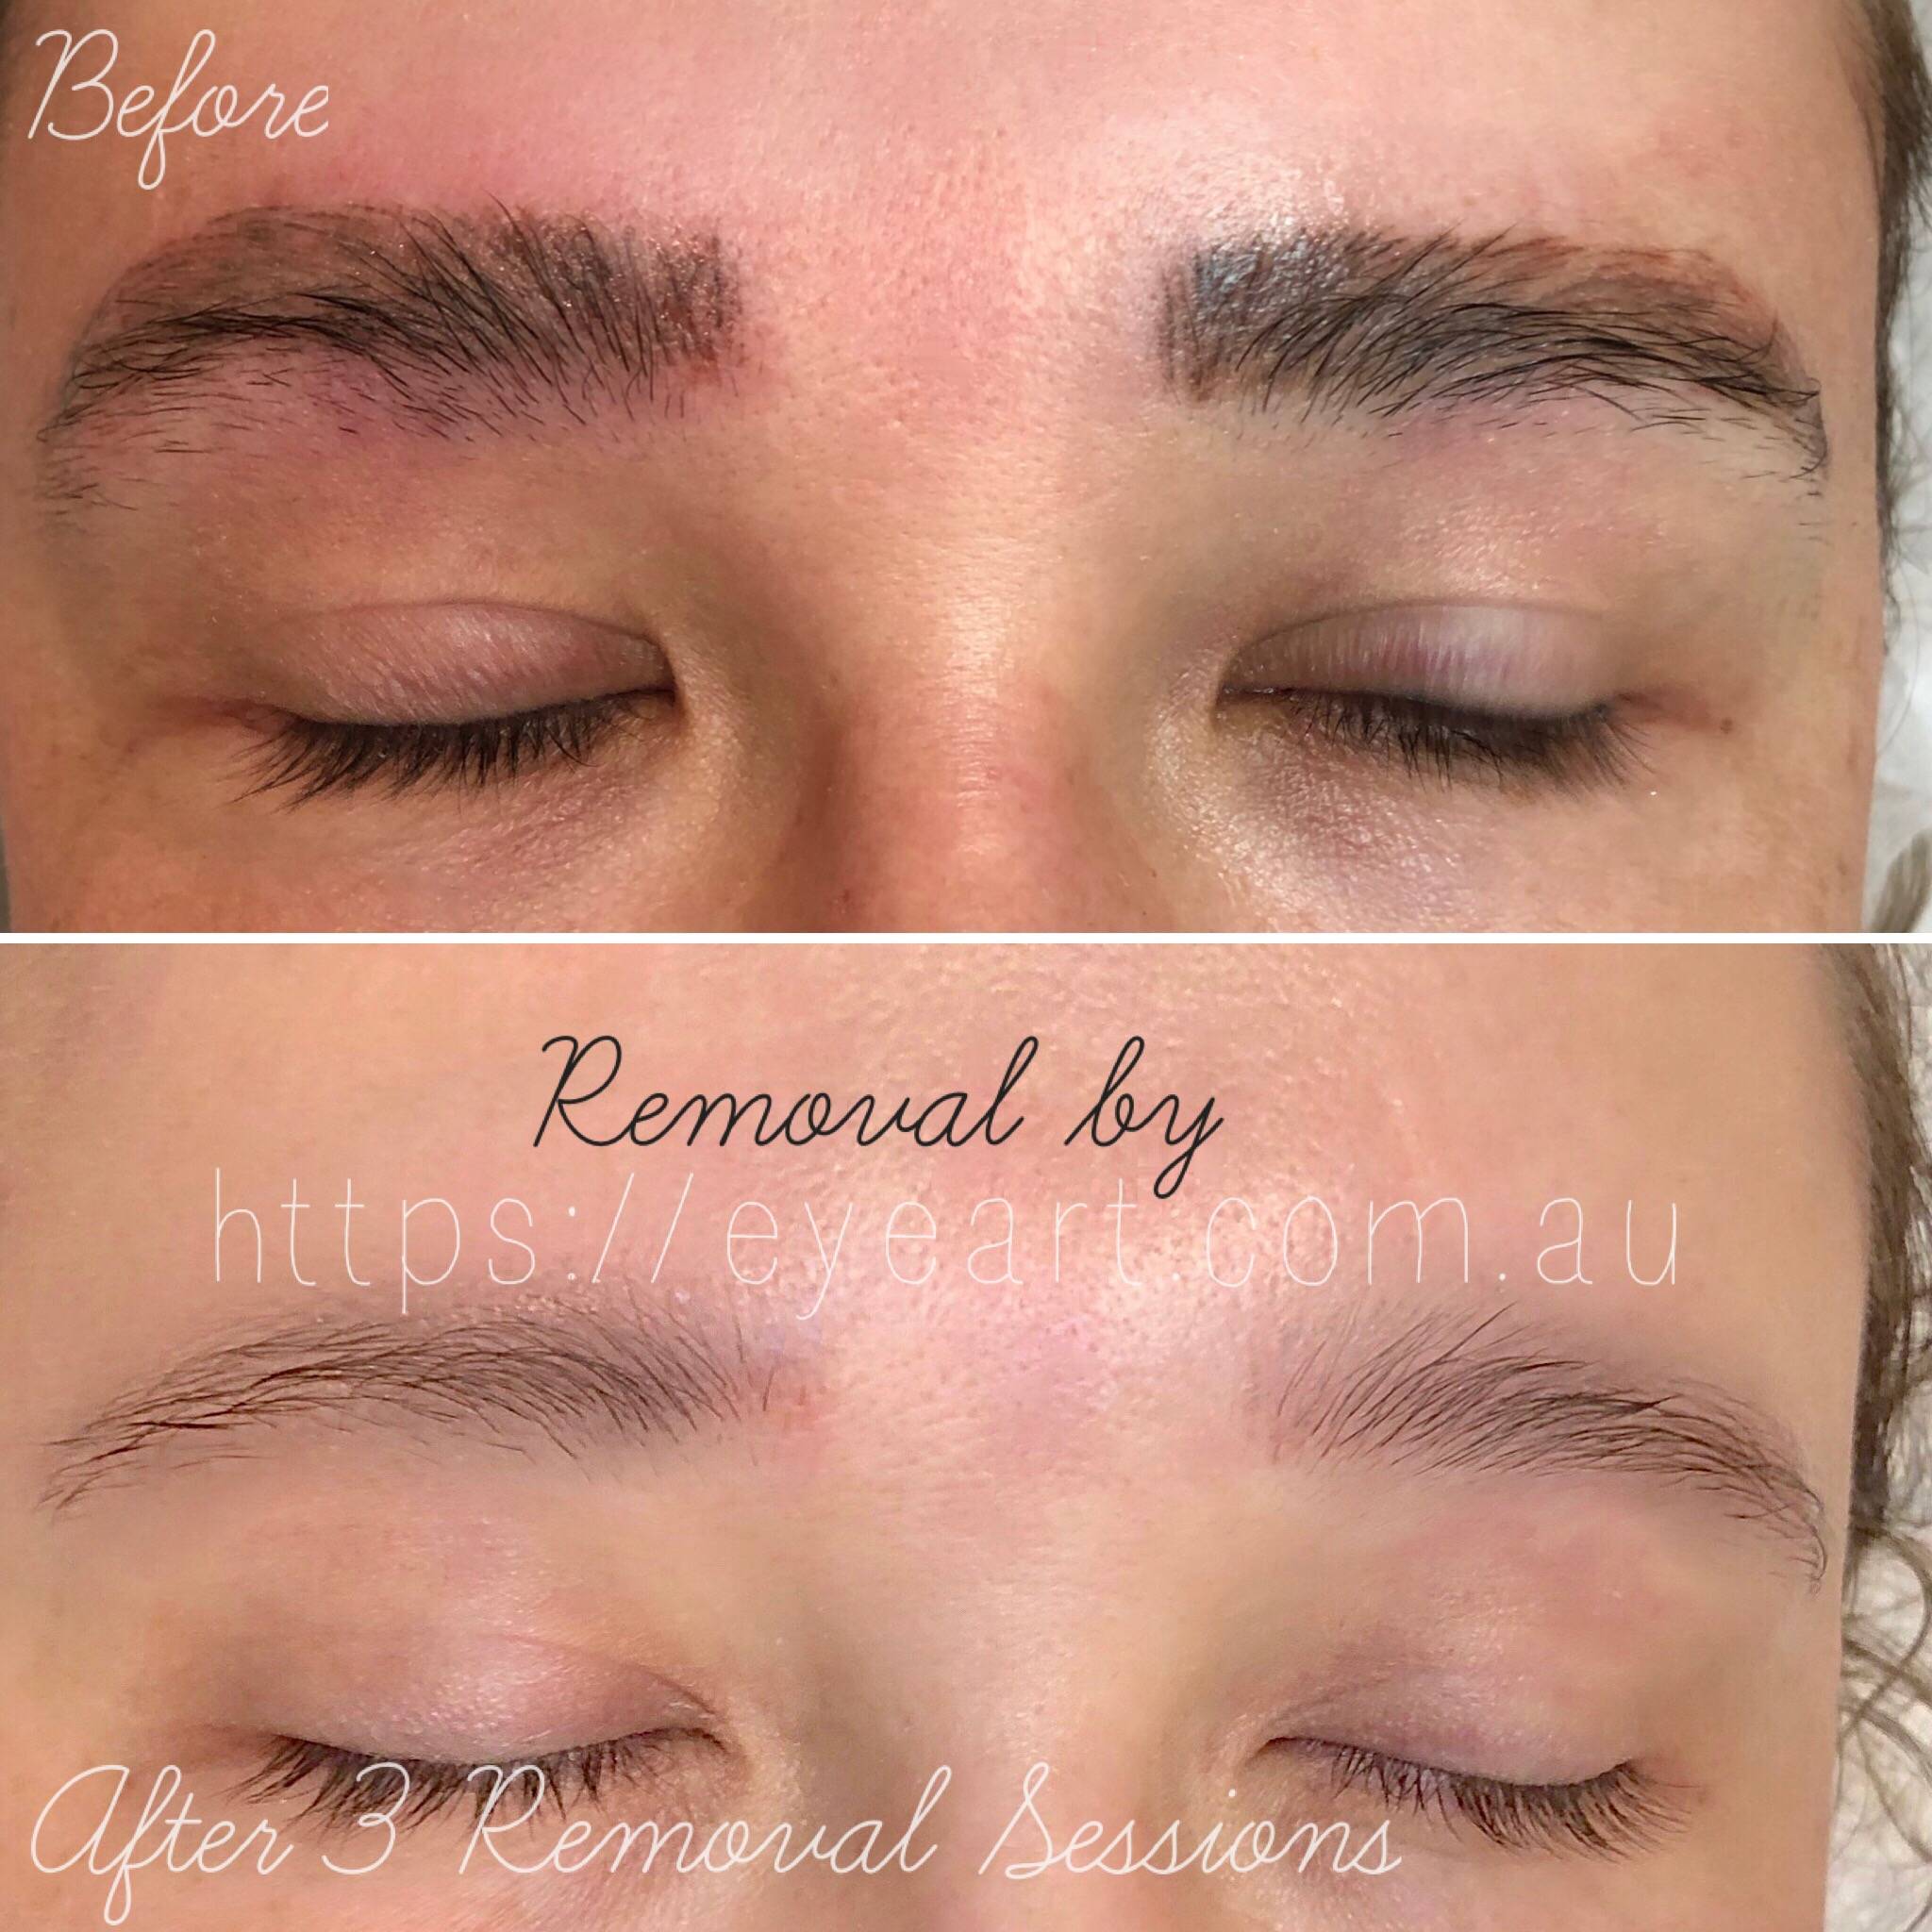 Eyebrow Tattoo Removal Melbourne, Victoria